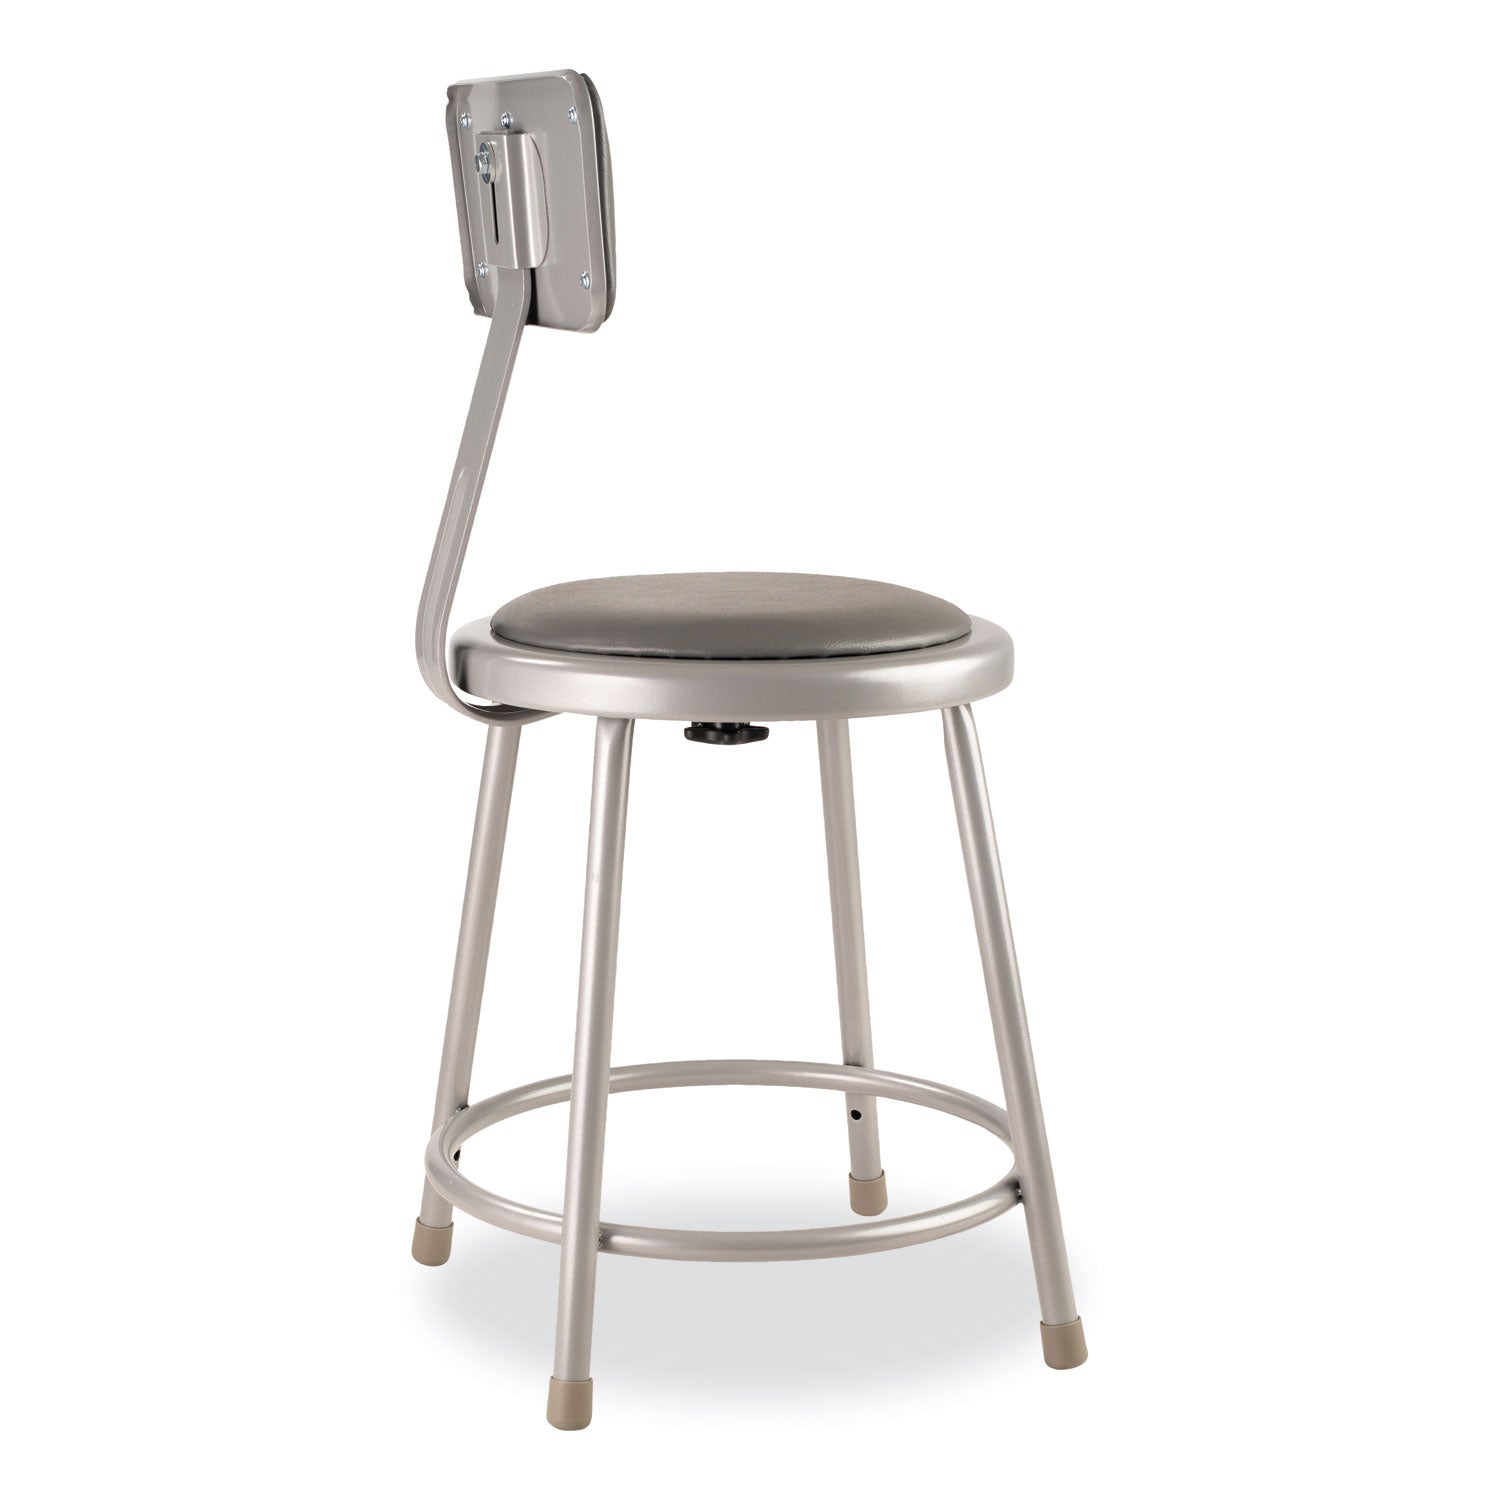 6400-series-heavy-duty-vinyl-padded-stool-w-backrest-supports-300-lb-18-seat-ht-gray-seat-back-baseships-in-1-3-bus-days_nps6418b - 3